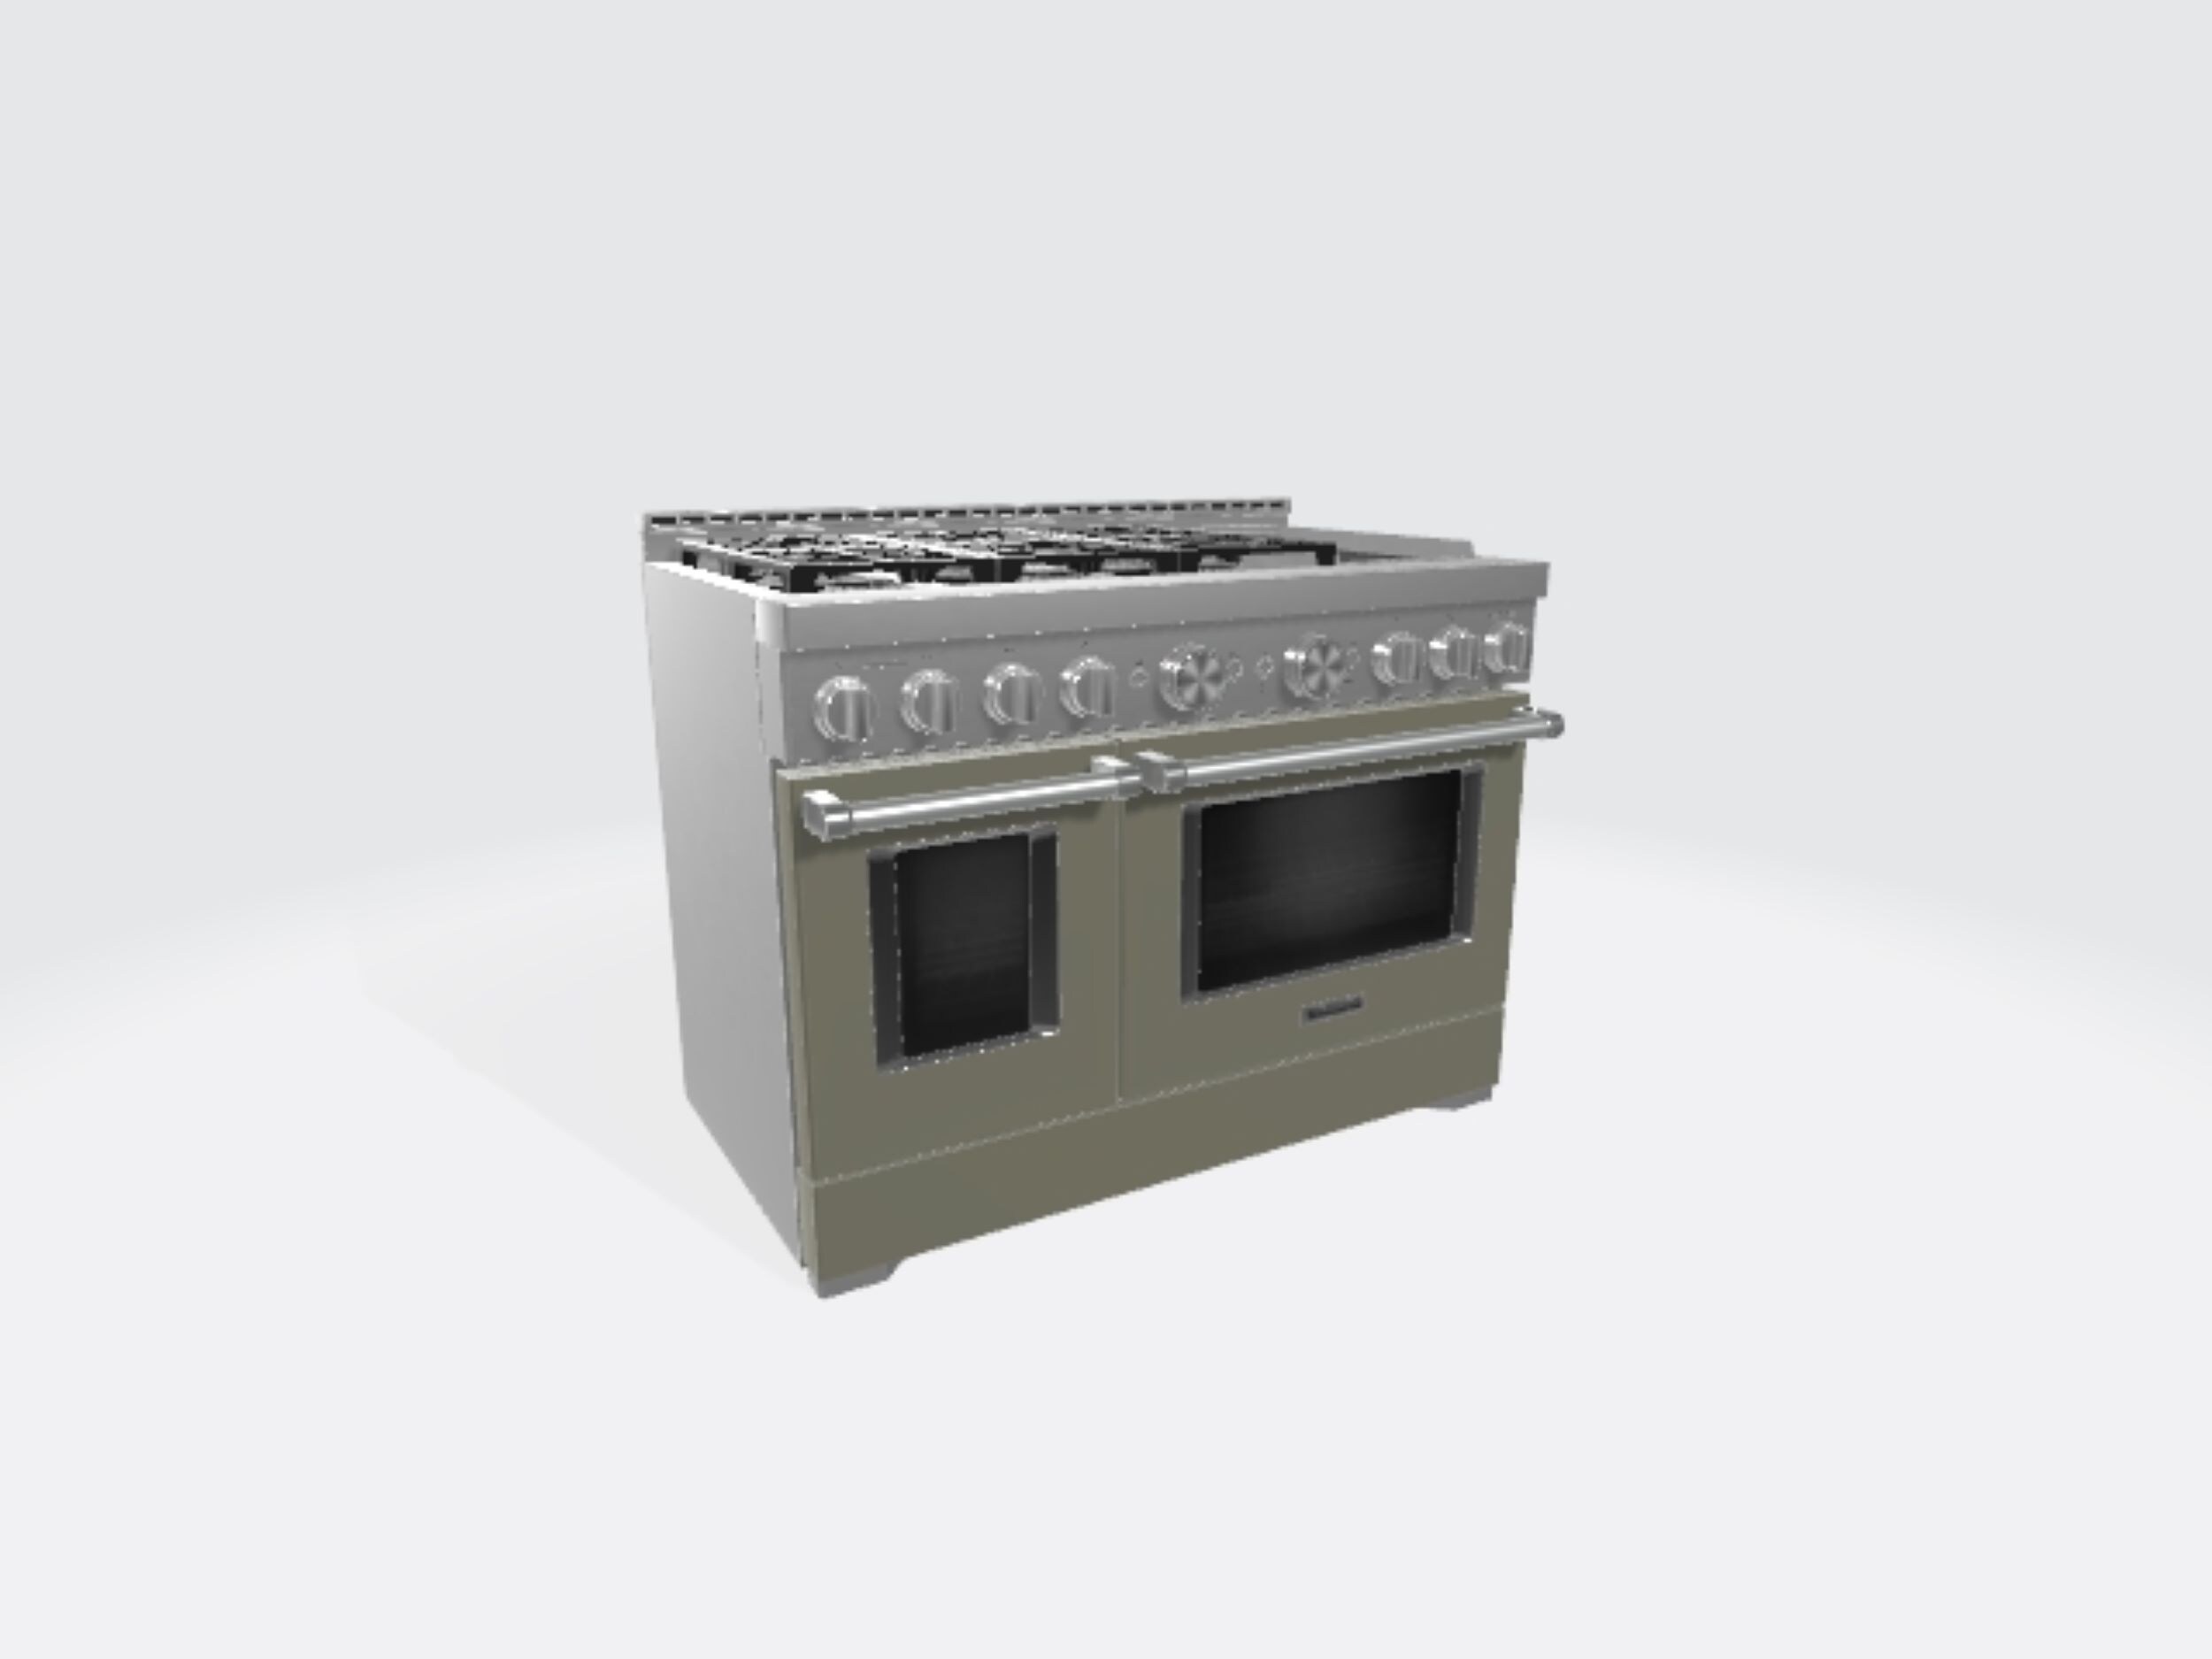 Rubbermaid Commercial Products Gas and Electric Range Oven